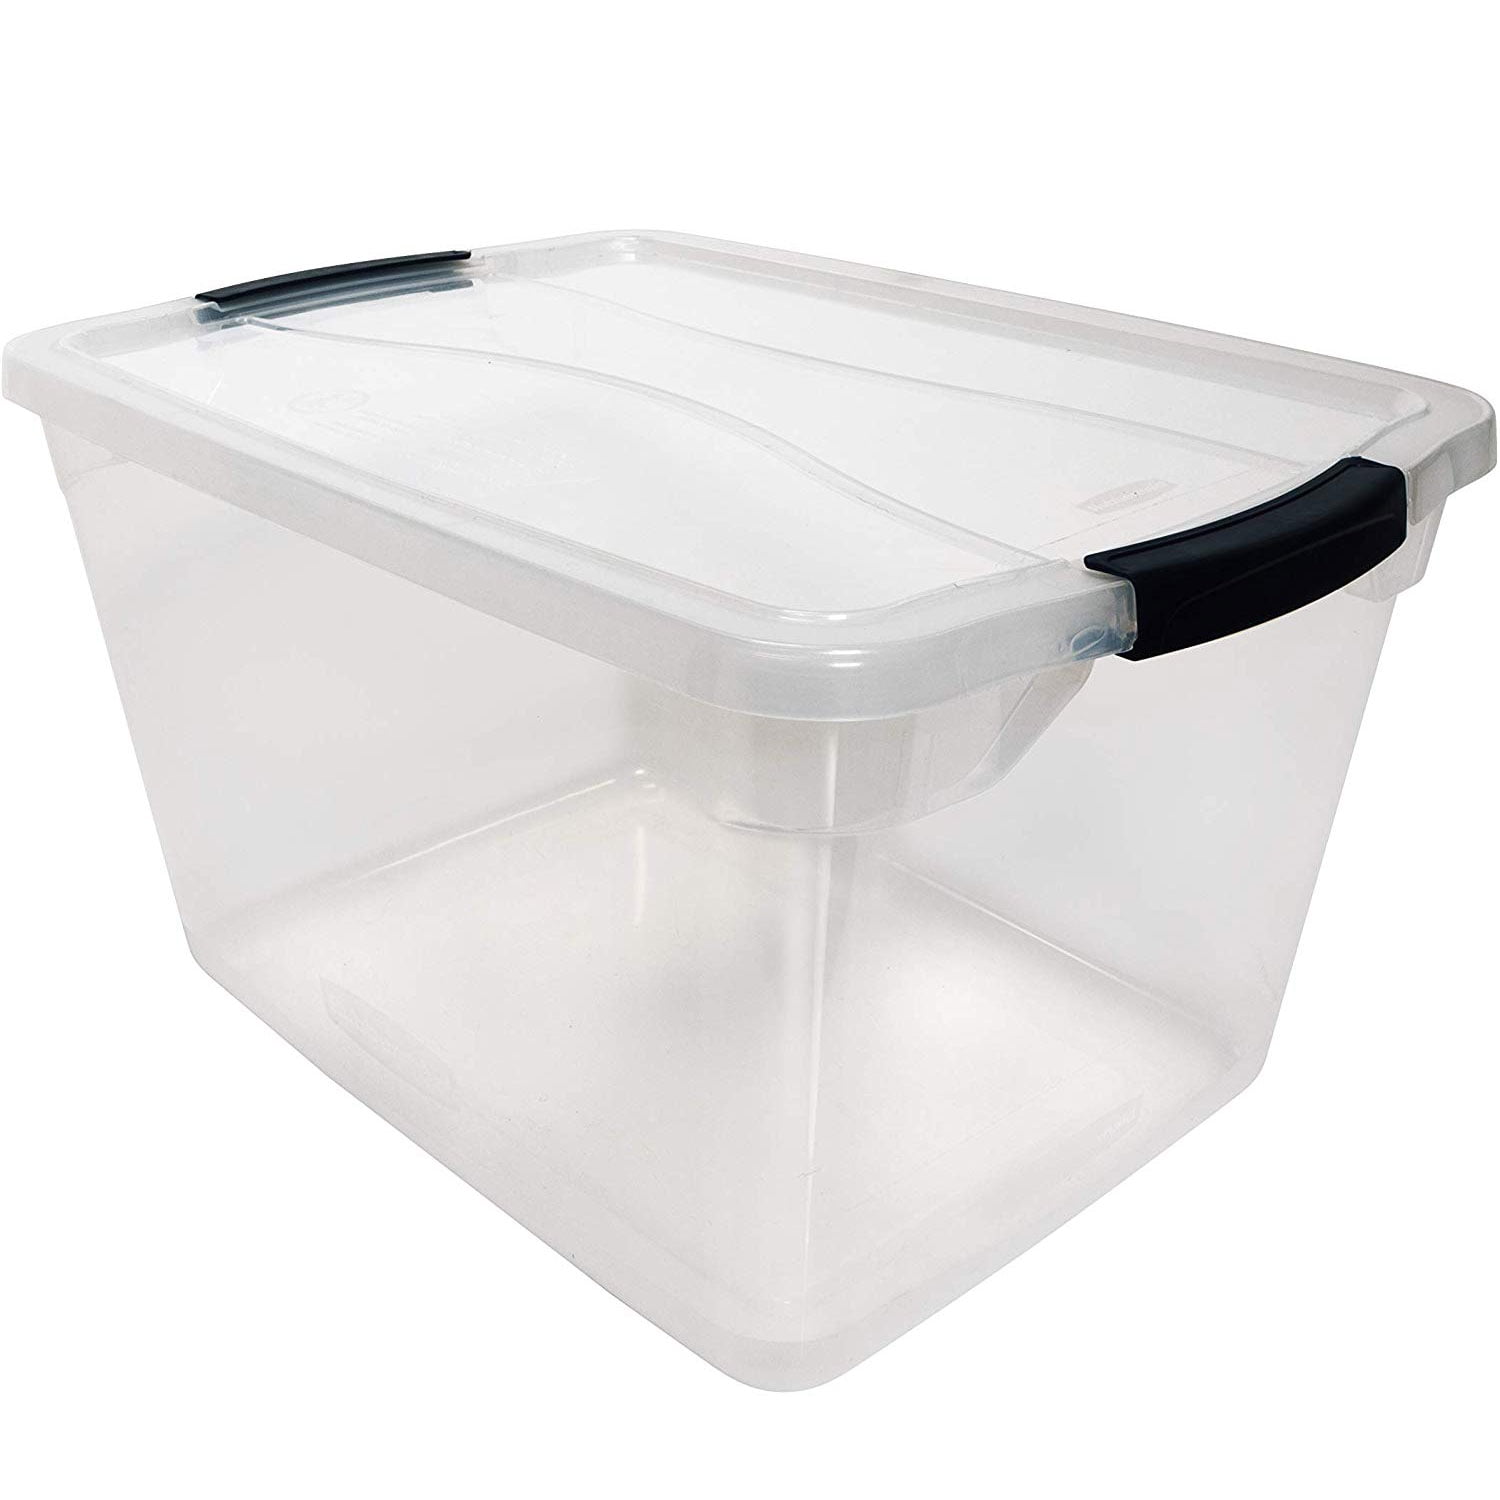 Rubbermaid Cleverstore 30 Plastic Storage with Lid, Clear Walmart.com